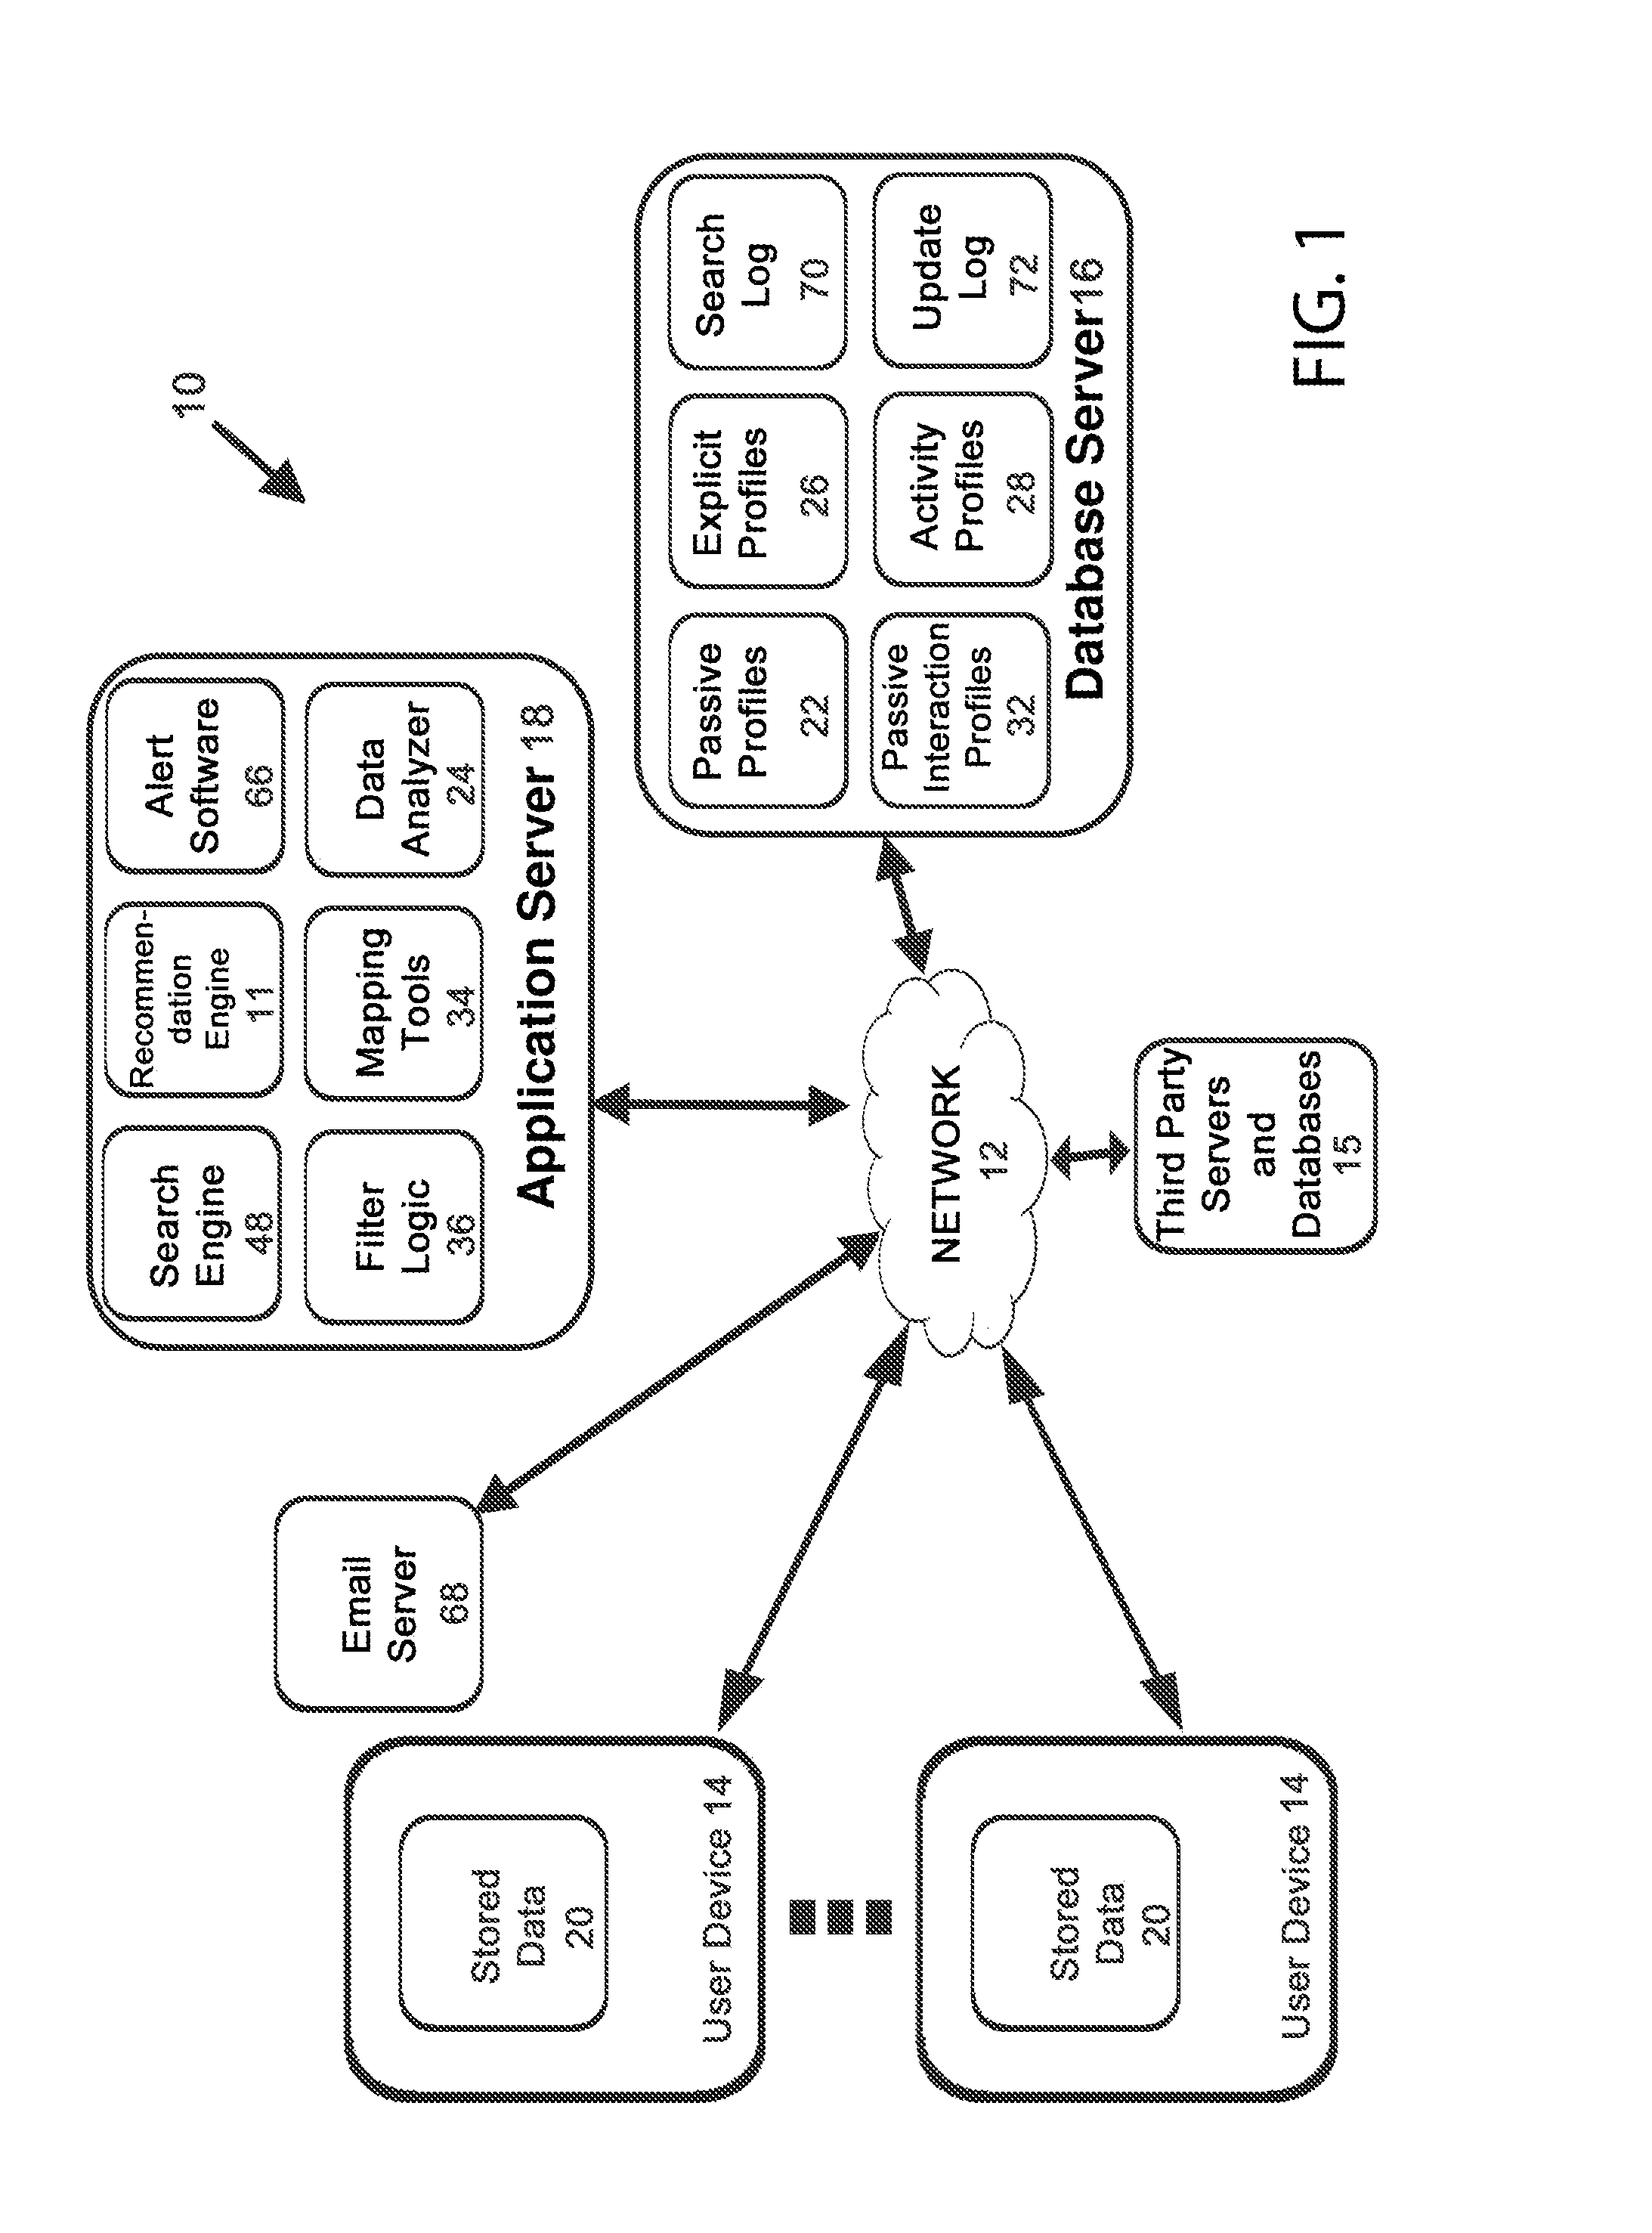 Methods and systems for improving engagement with a recommendation engine that recommends items, peers, and services